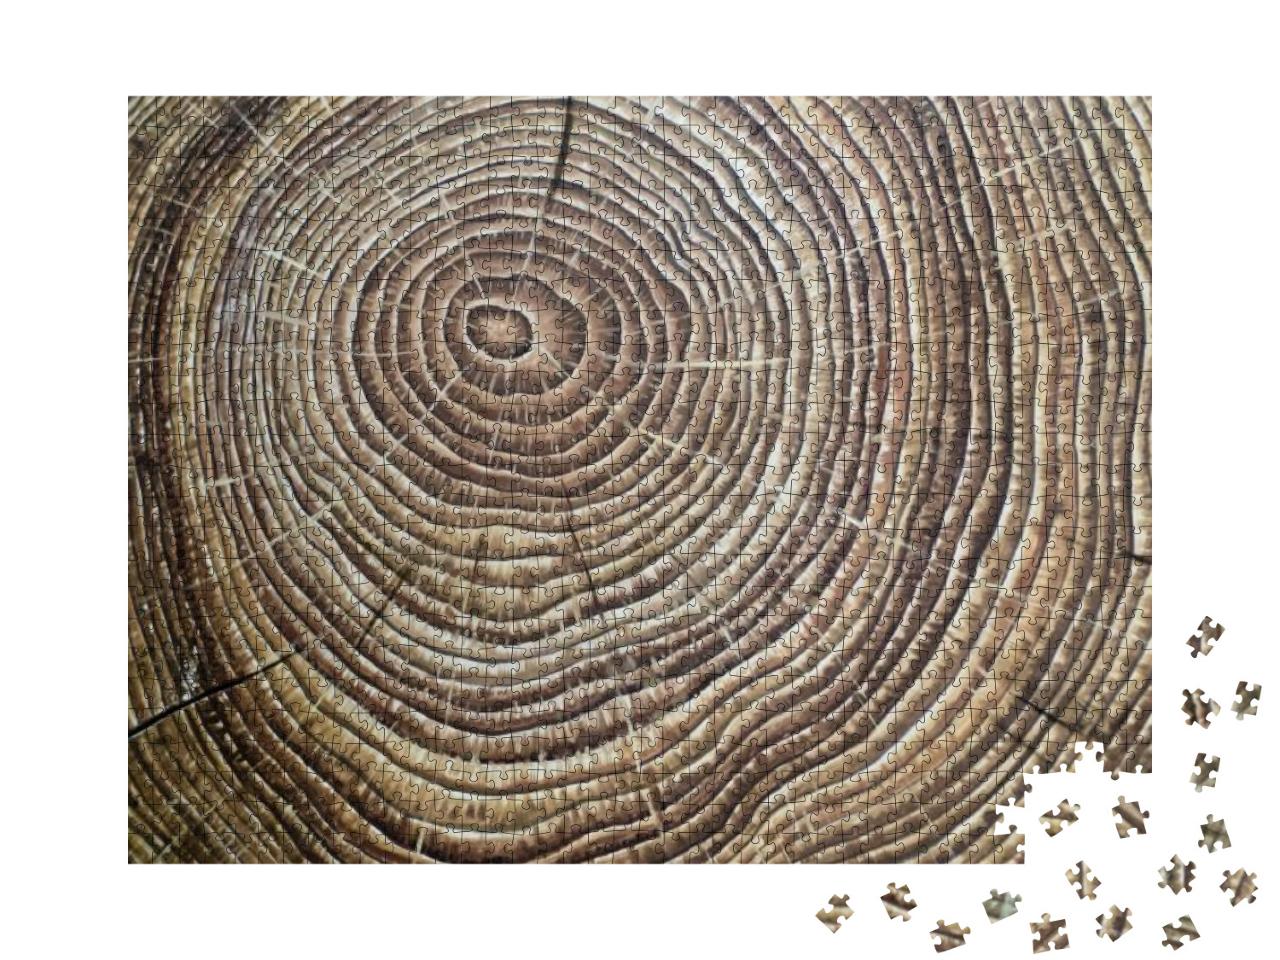 Painted Brown Wooden Annual Rings... Jigsaw Puzzle with 1000 pieces